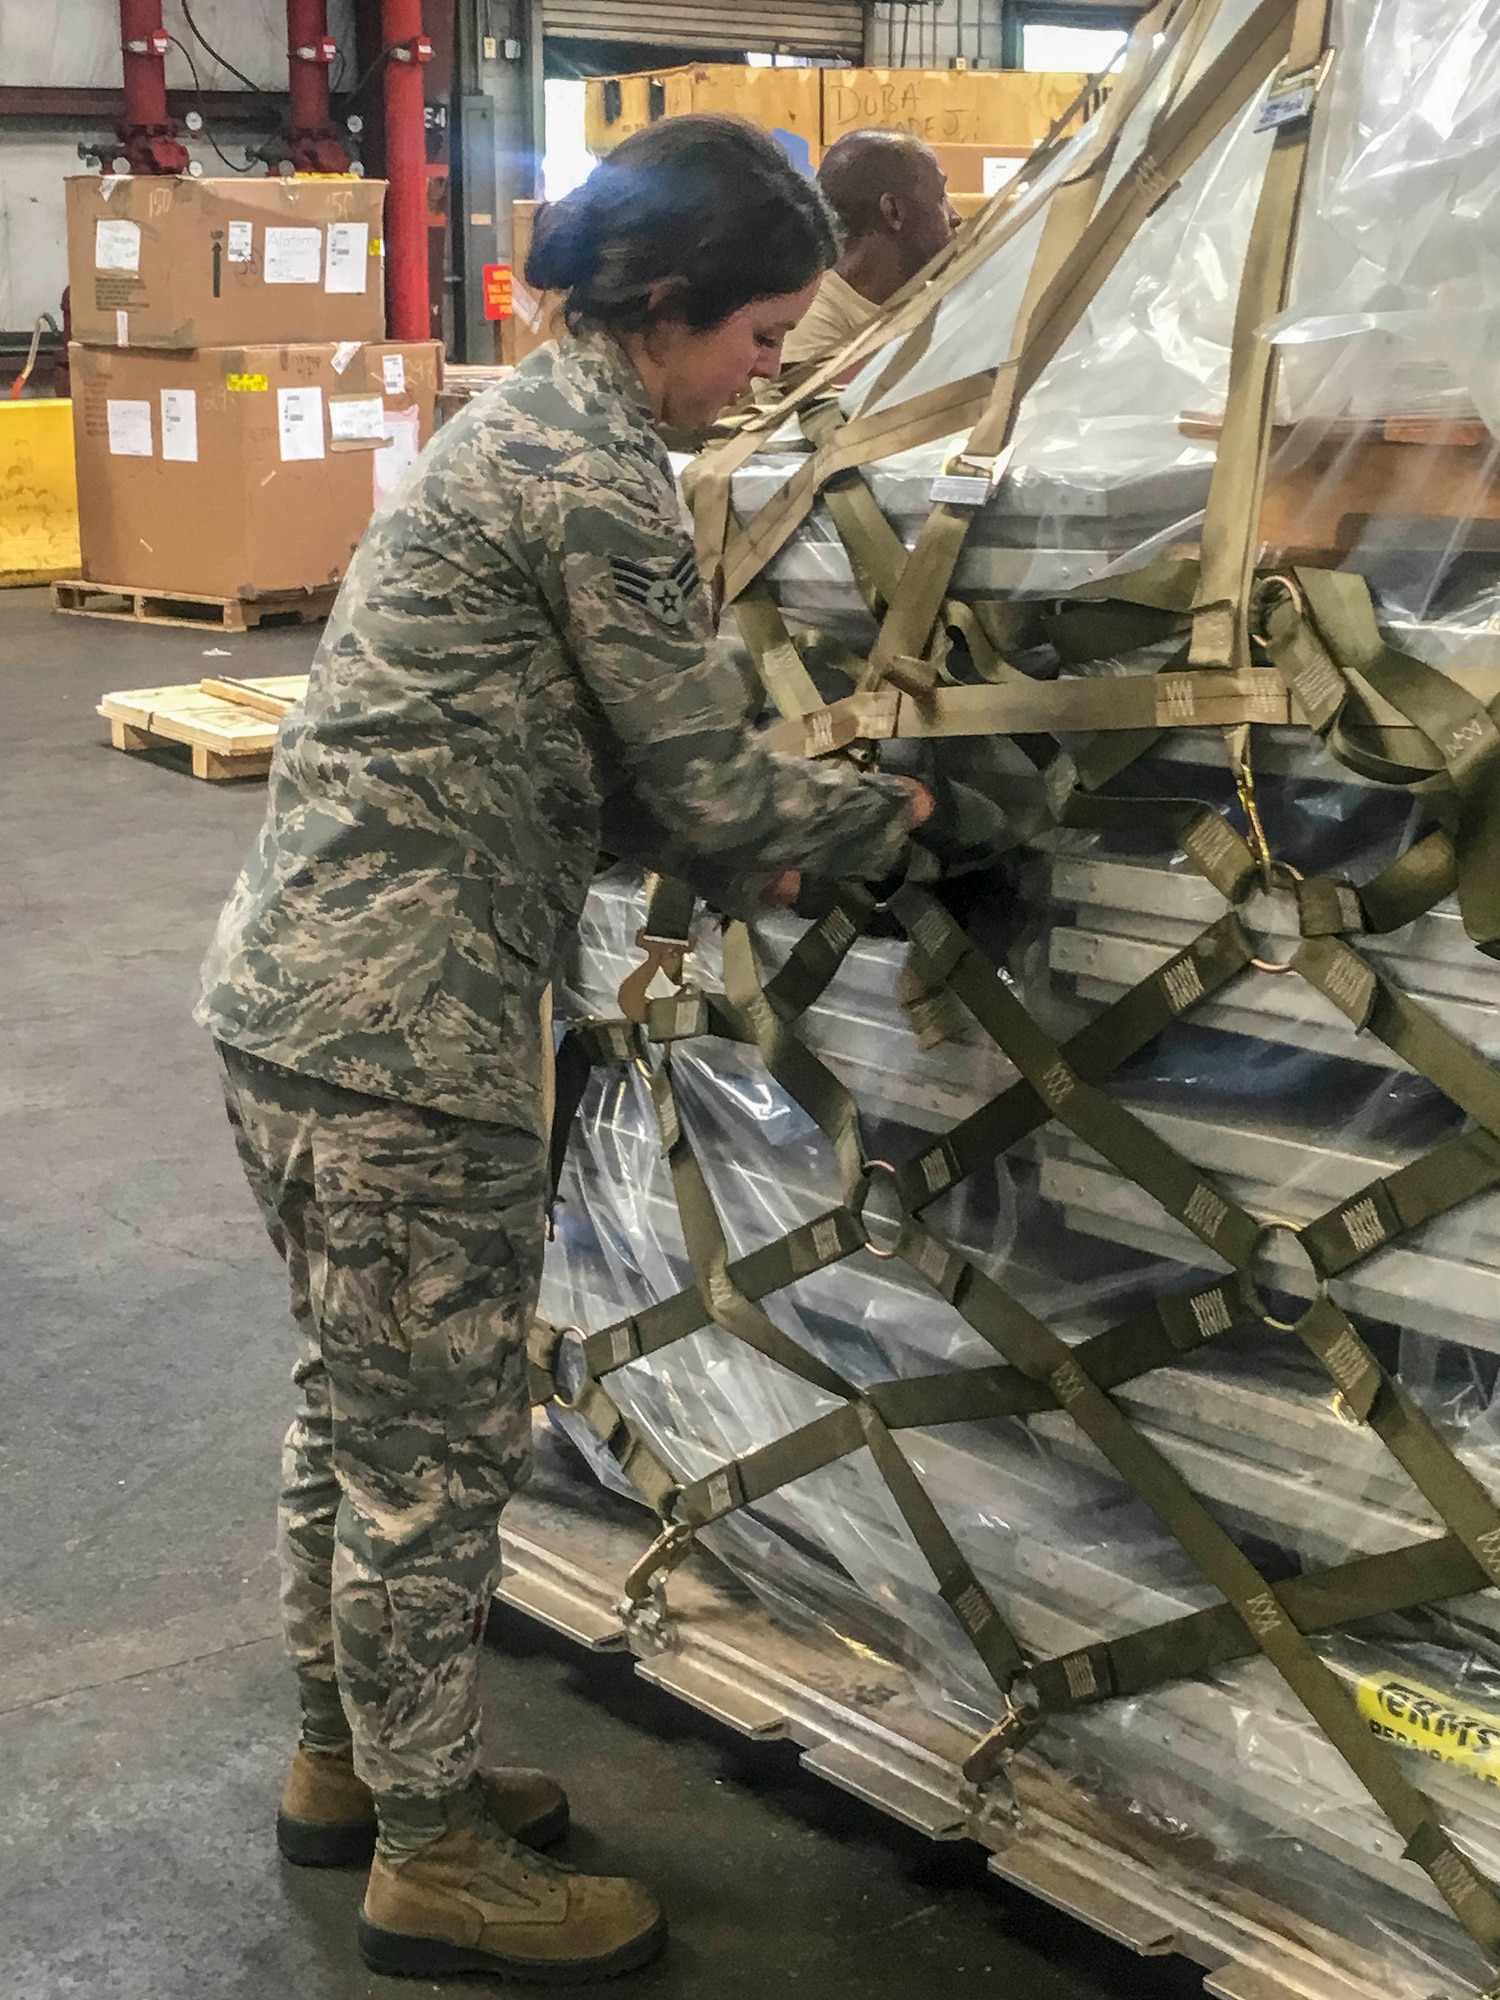 Senior Airman Hannah Gillespie, 96th Aerial Port Squadron air transportation specialist, prepares and palletizes cargo for shipment on June 30, 2018 at Norfolk, Va.  •	The majority of our Reserve members have to meet the same requirements of Active Duty personnel. This means they have to balance a fulltime civilian job or college studies while maintaining their military readiness. Traditional Reservists have one weekend a month, two weeks a year to fulfill training in order to prepare for real world missions and requirements, ensuring strategic depth and readiness. (Courtesy photo)